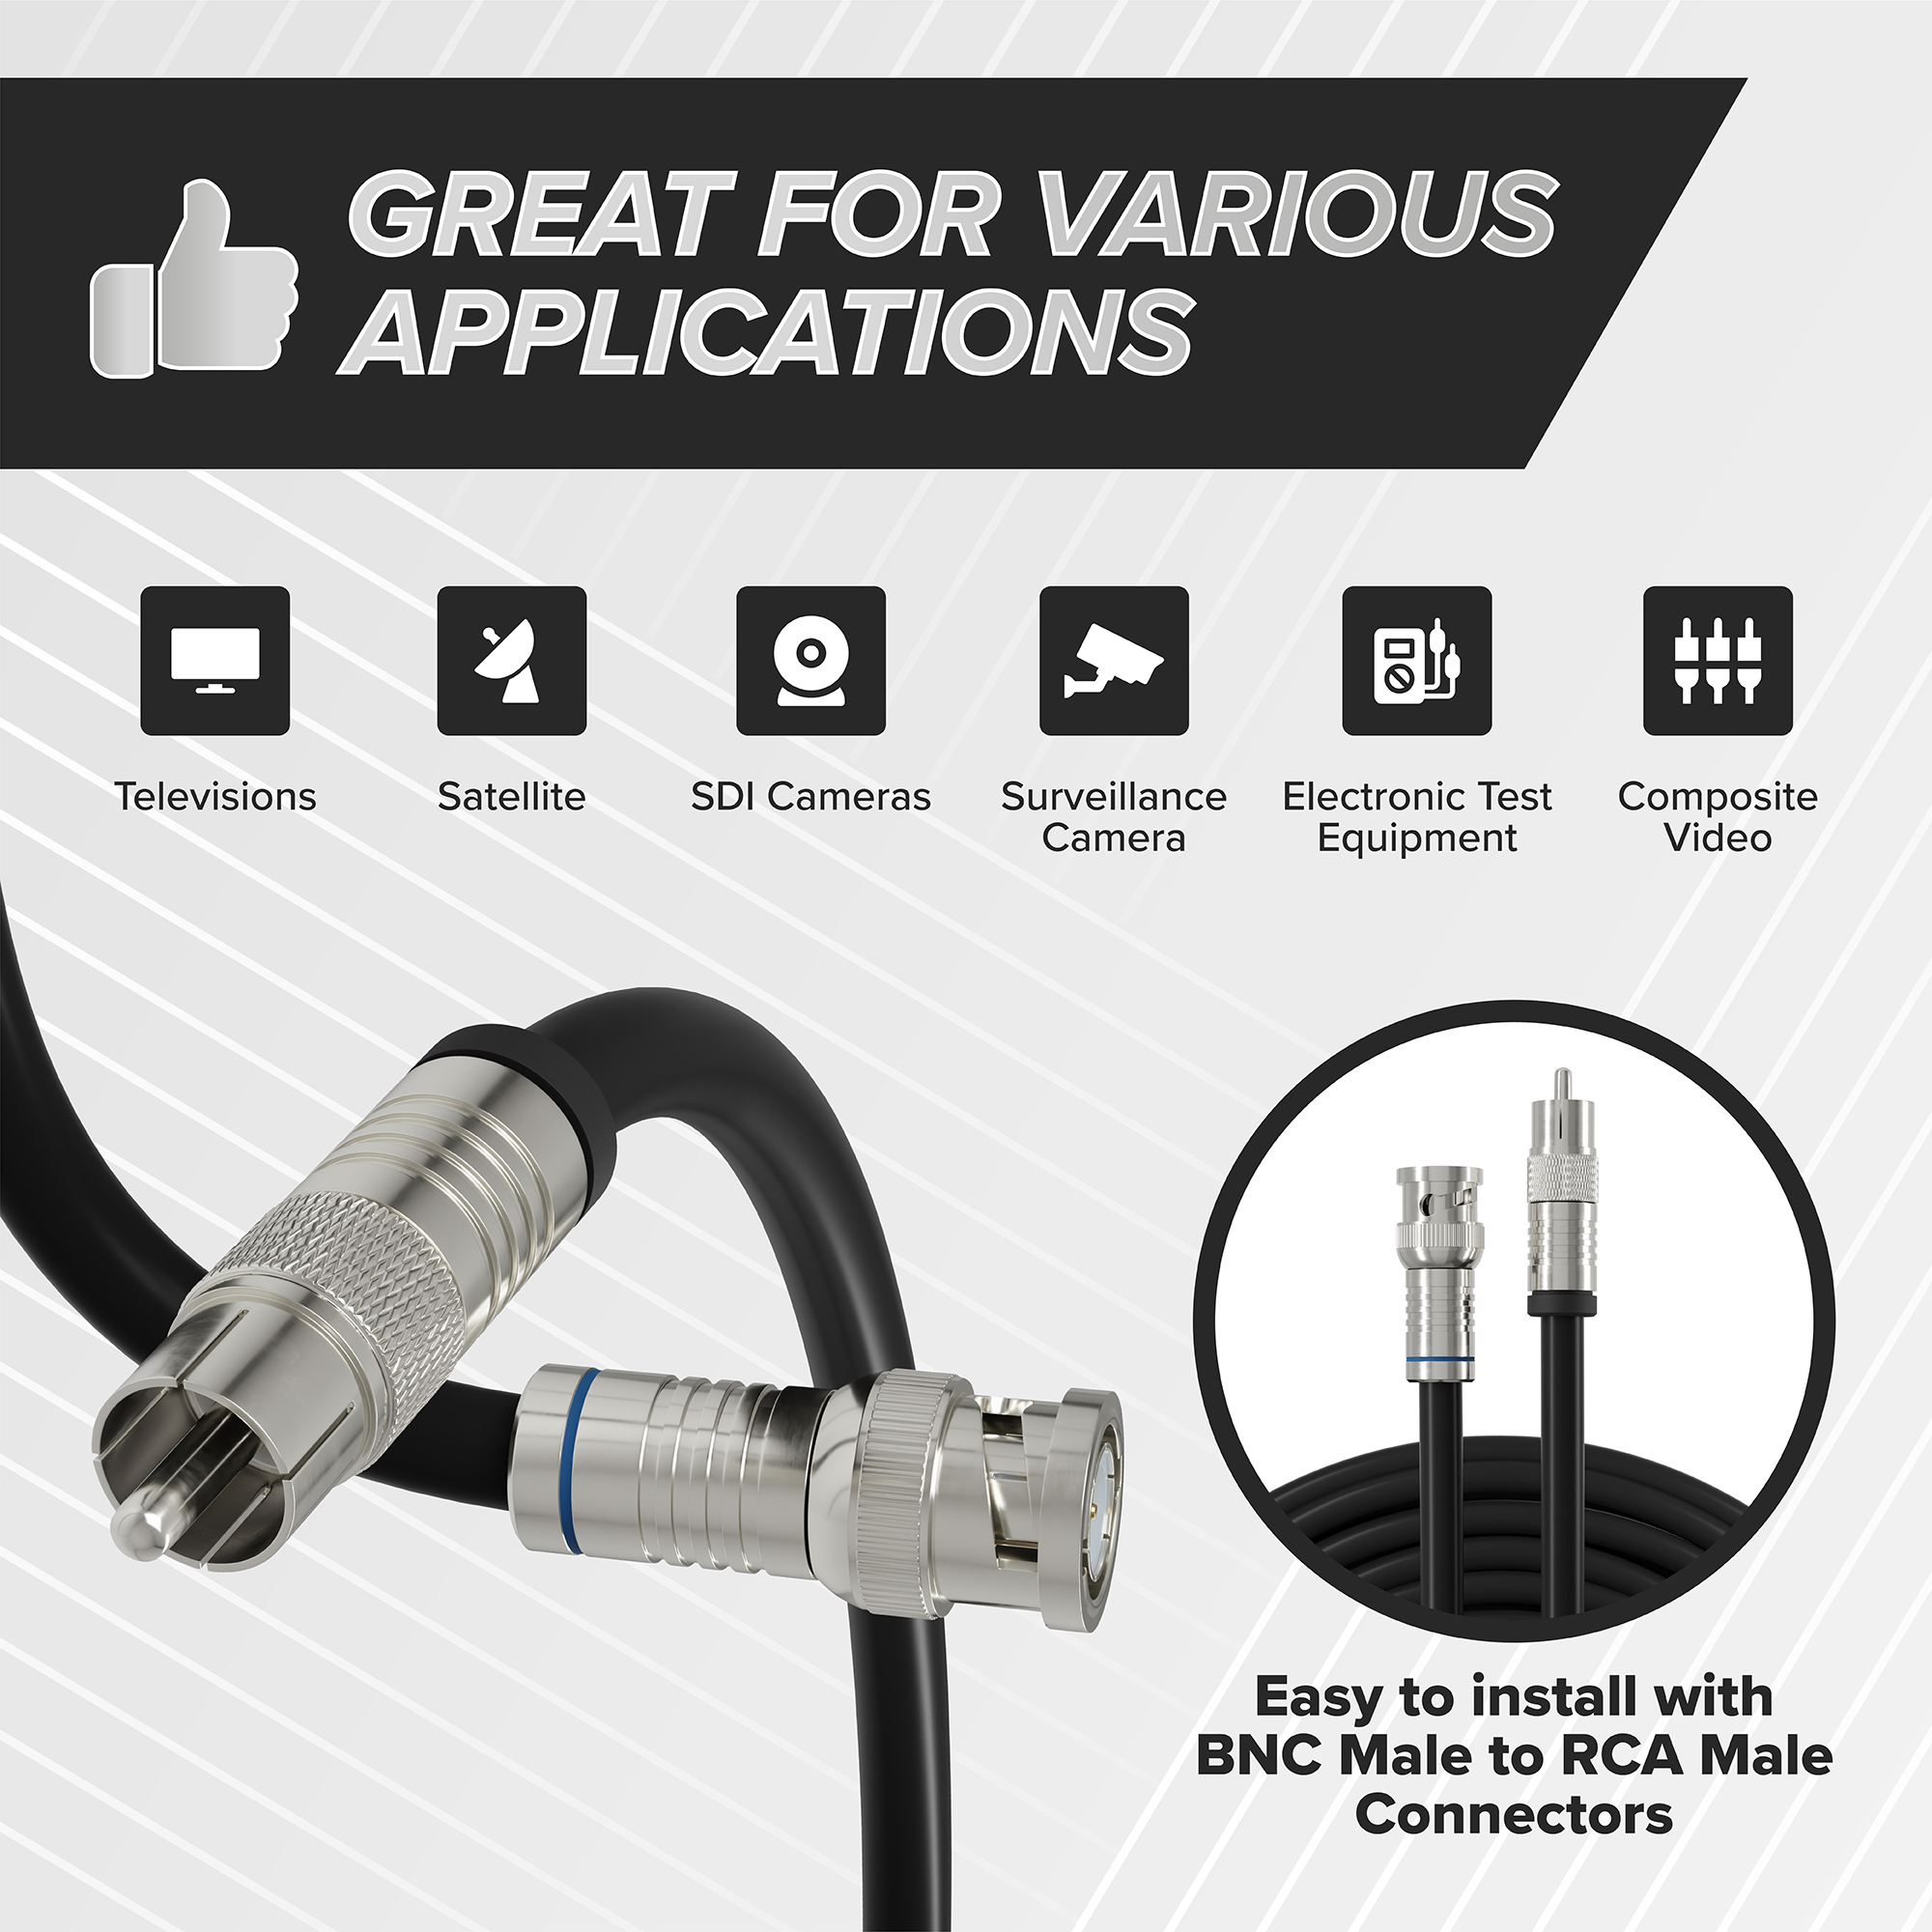 Black, 25 ft BNC to RCA RG6 Cable - Professional Grade - Male BNC to Male RCA Cable  - BNC Cable - 75 Ohm Coaxial, 50/75 Ohm Connectors, SDI, HD-SDI, CCTV, Camera, and More - 25 Feet Long, in Black - image 2 of 10